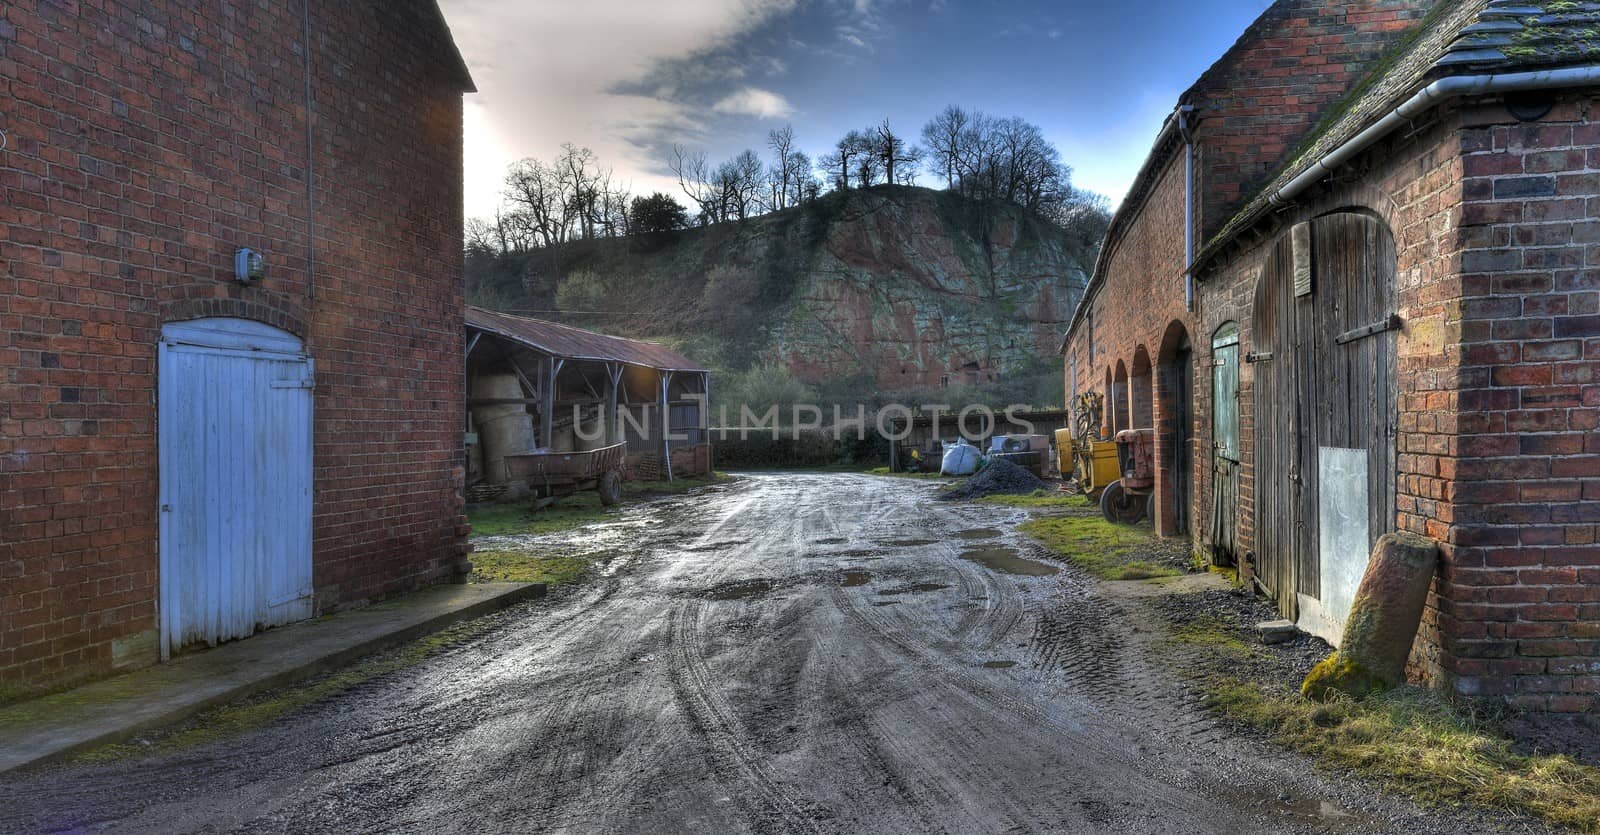 Old run-down brick and tile farm at Bewdley, Worcestershire, England.